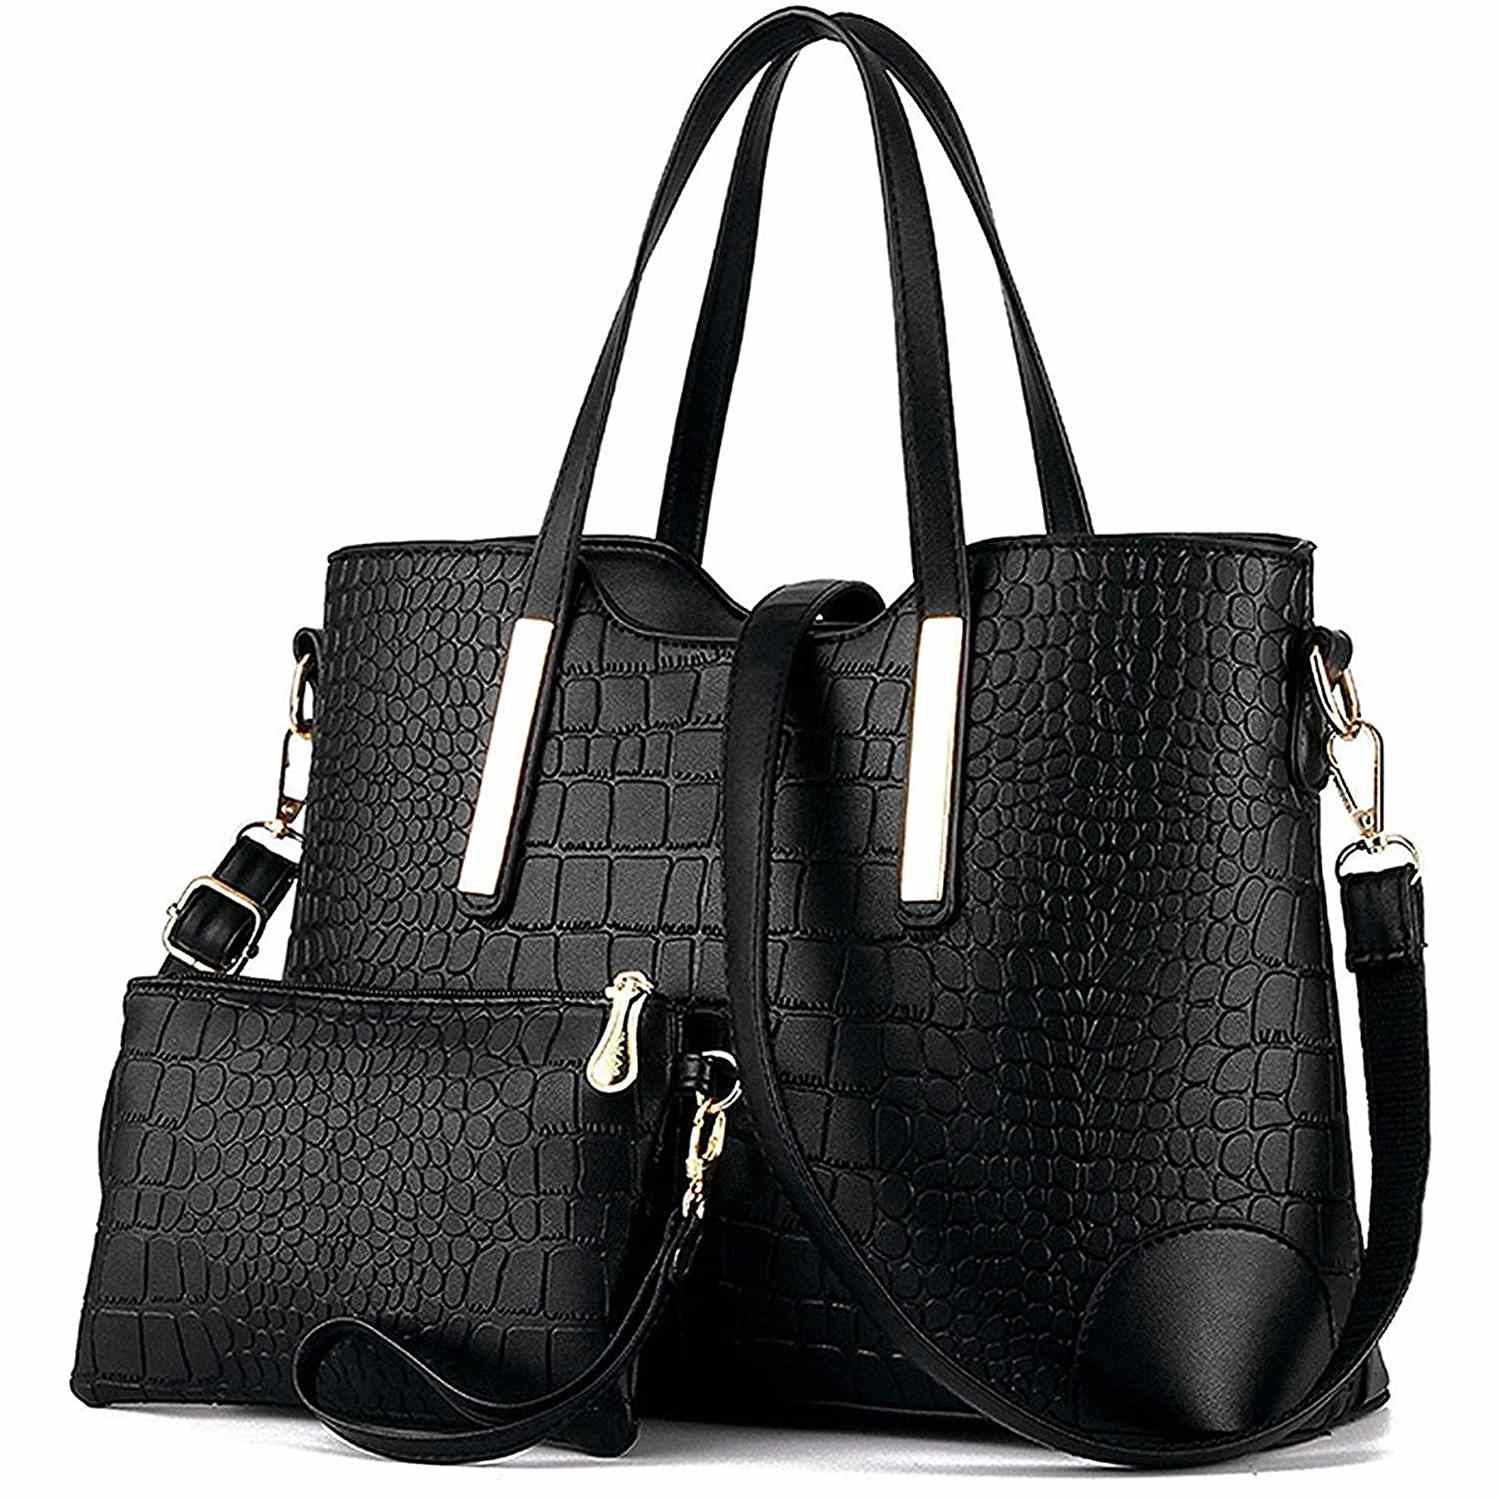 Women's Satchel Purses and Handbags for Women Shoulder Tote Bags Wallets Gift